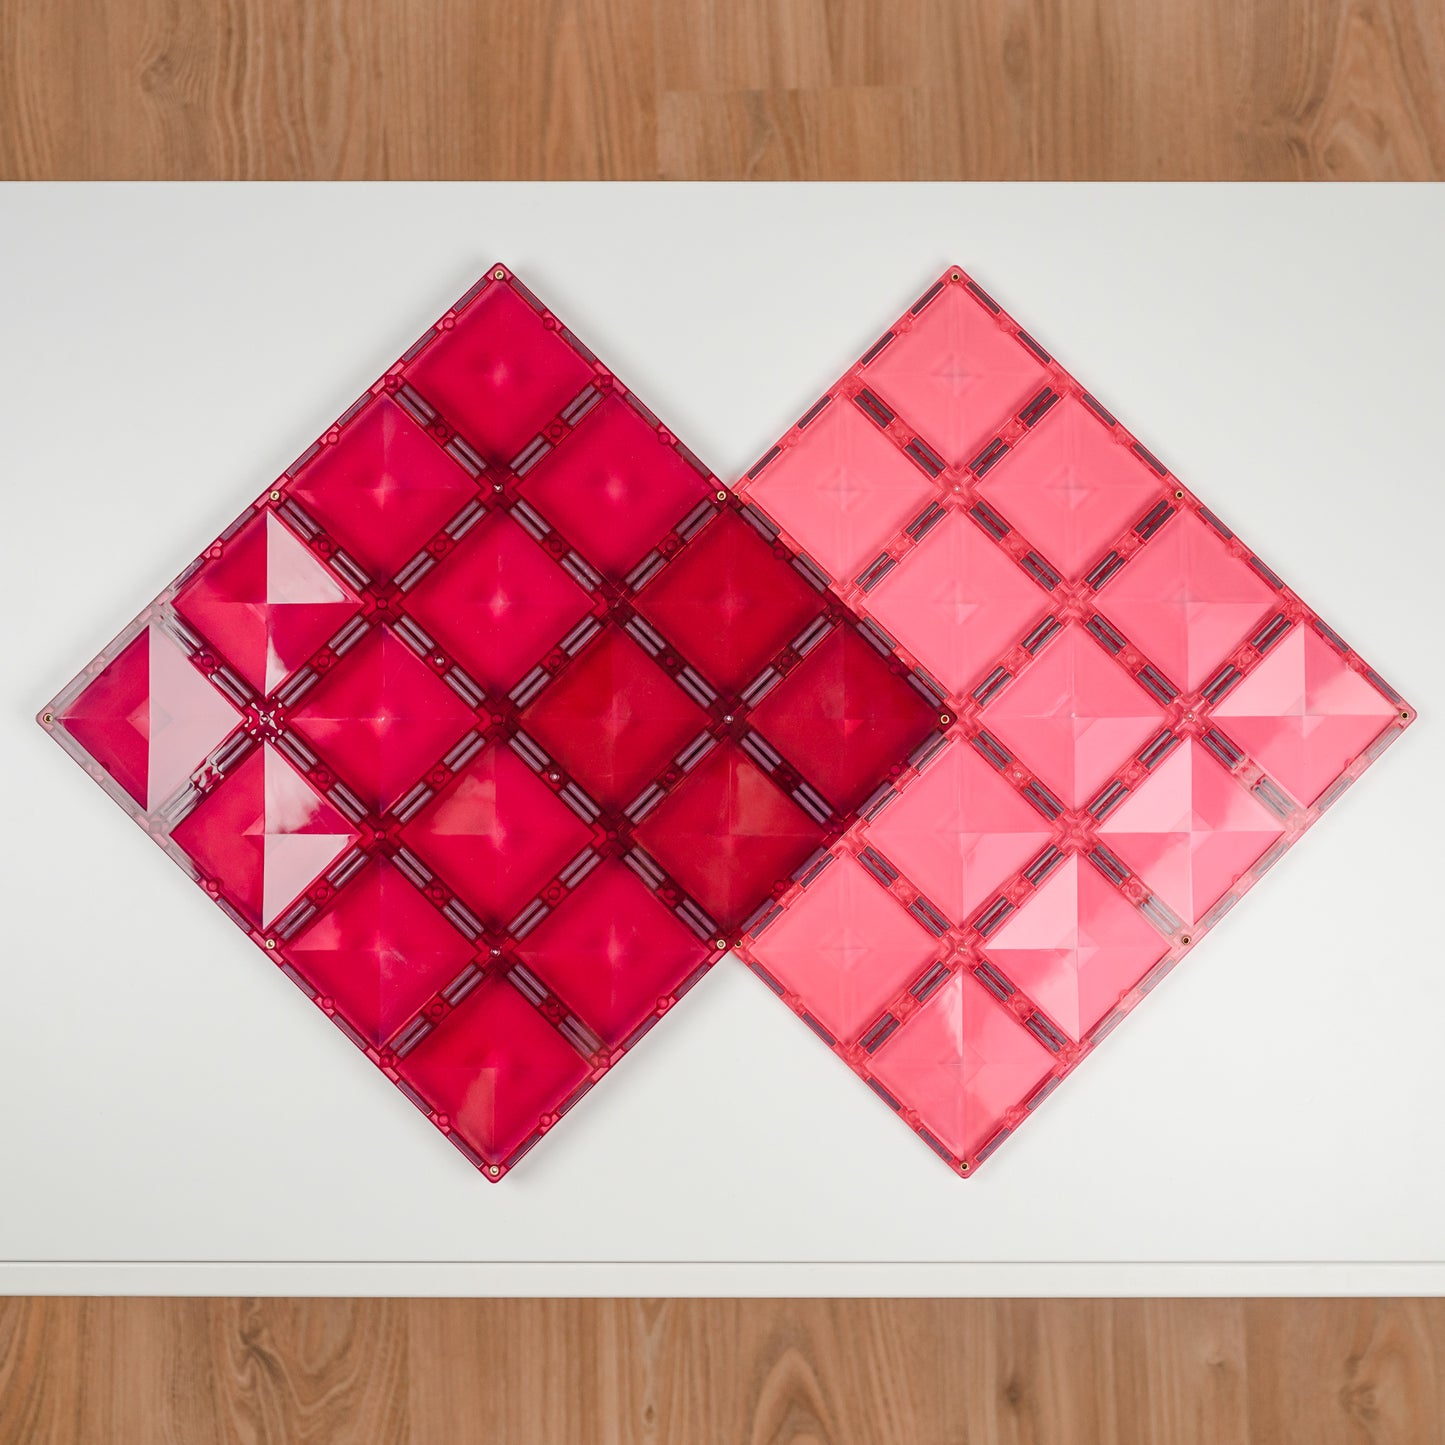 Connetix - 2 Piece Base Plate Pink & Berry Pack Magnetic Tiles